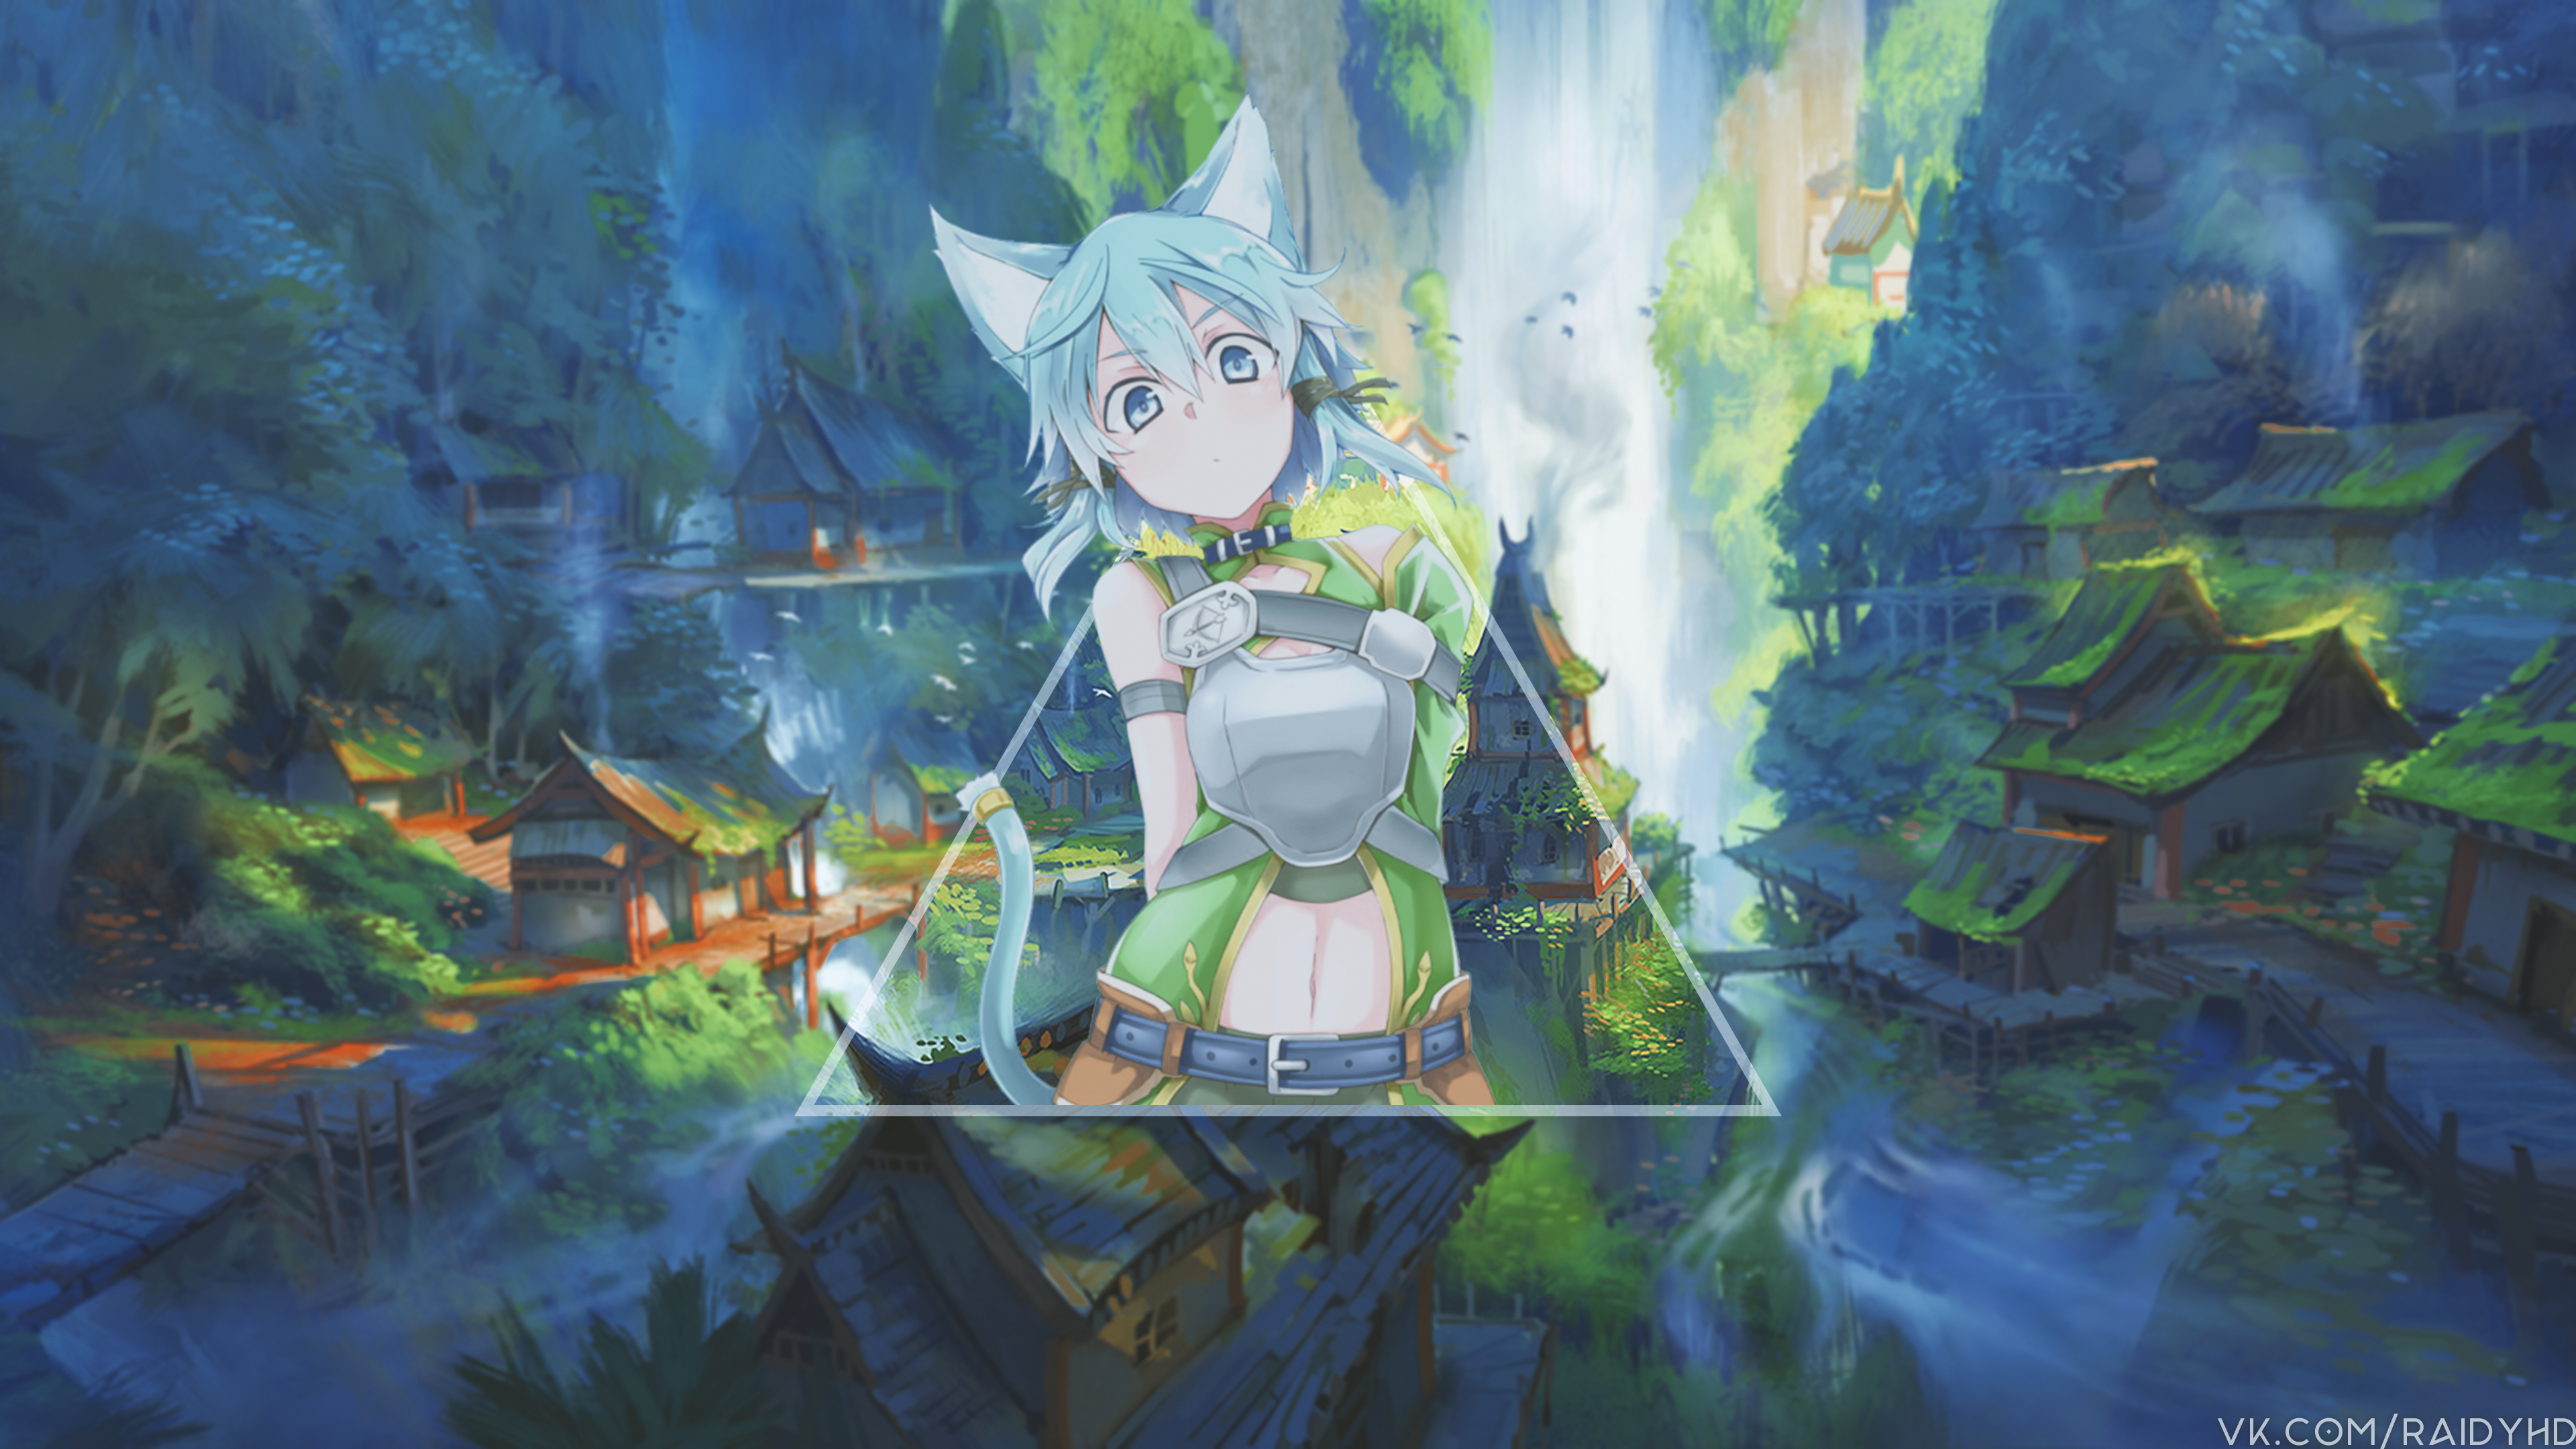 Anime 3840x2160 anime anime girls picture-in-picture Sword Art Online Asada Shino